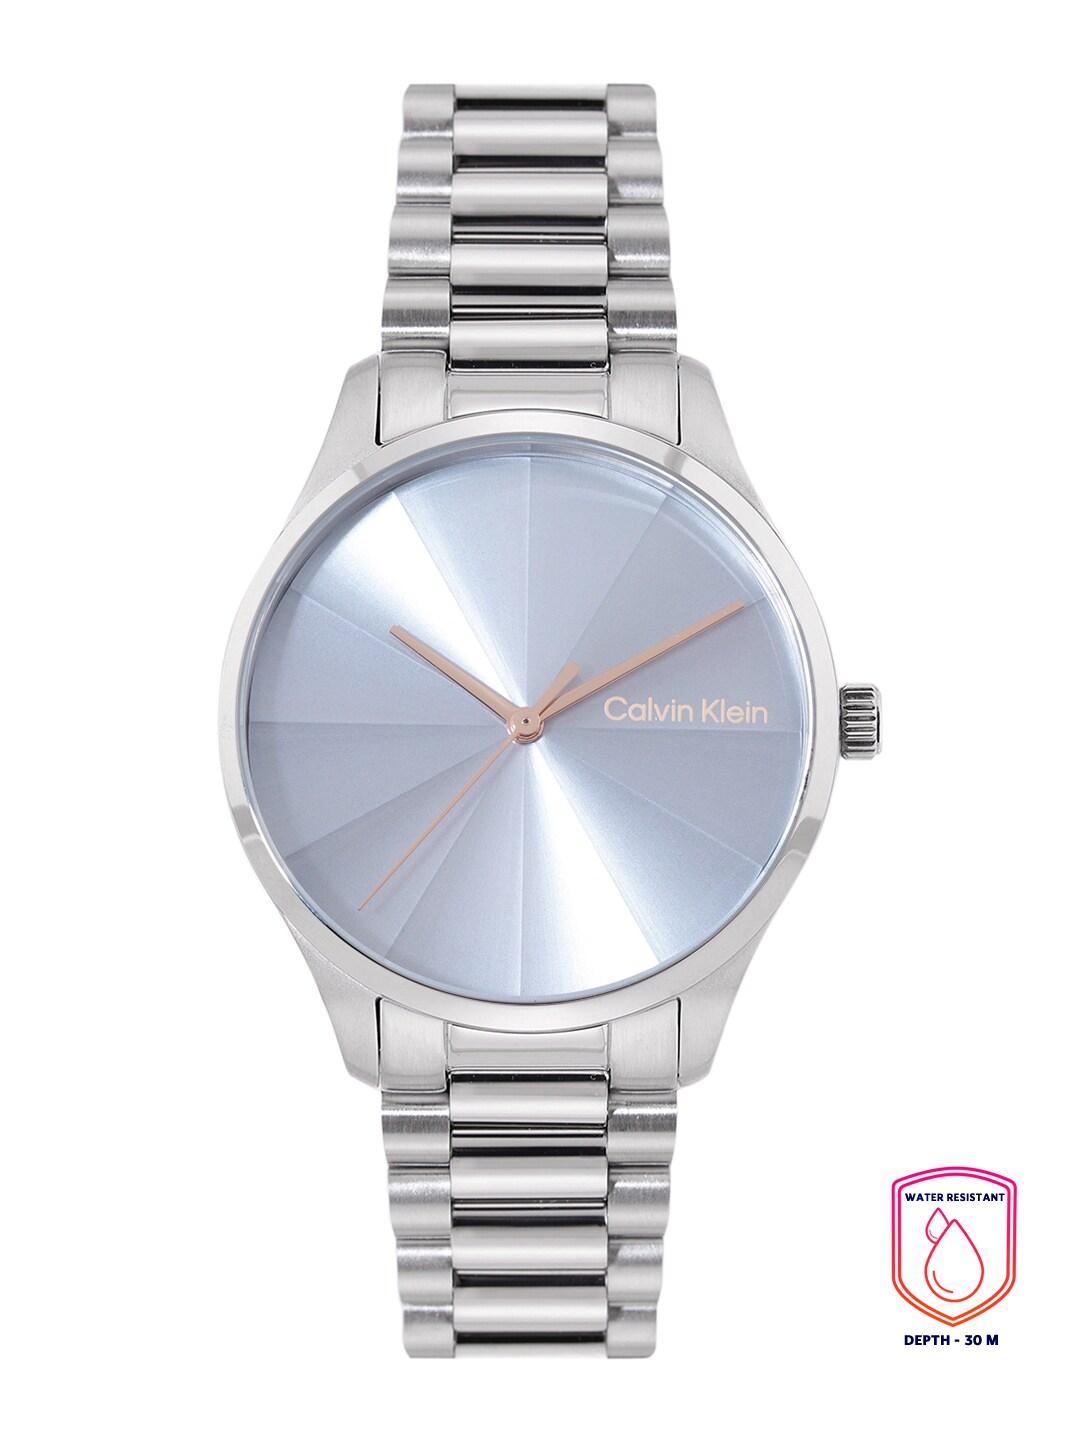 calvin klein unisex patterned dial & stainless steel analogue watch 25200230